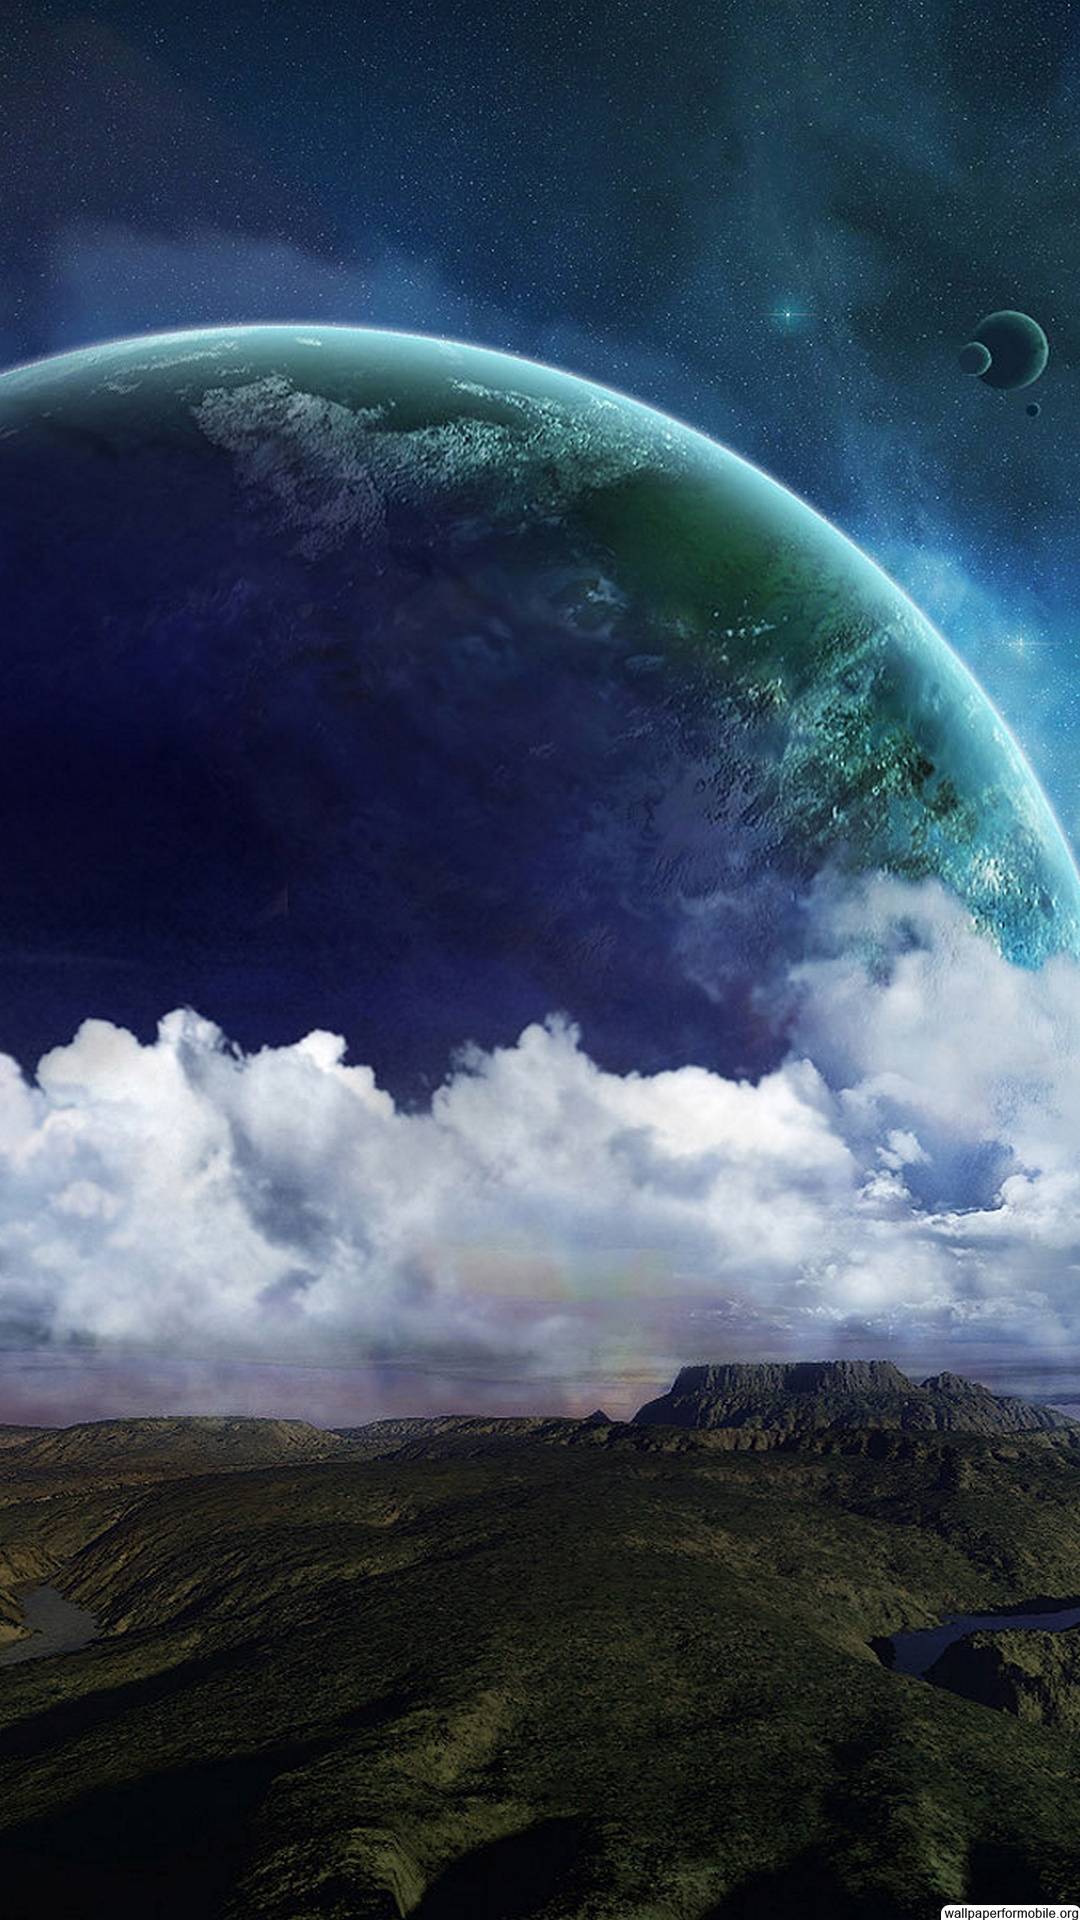 3D Space Wallpaper Free Download. Wallpaper for Mobile